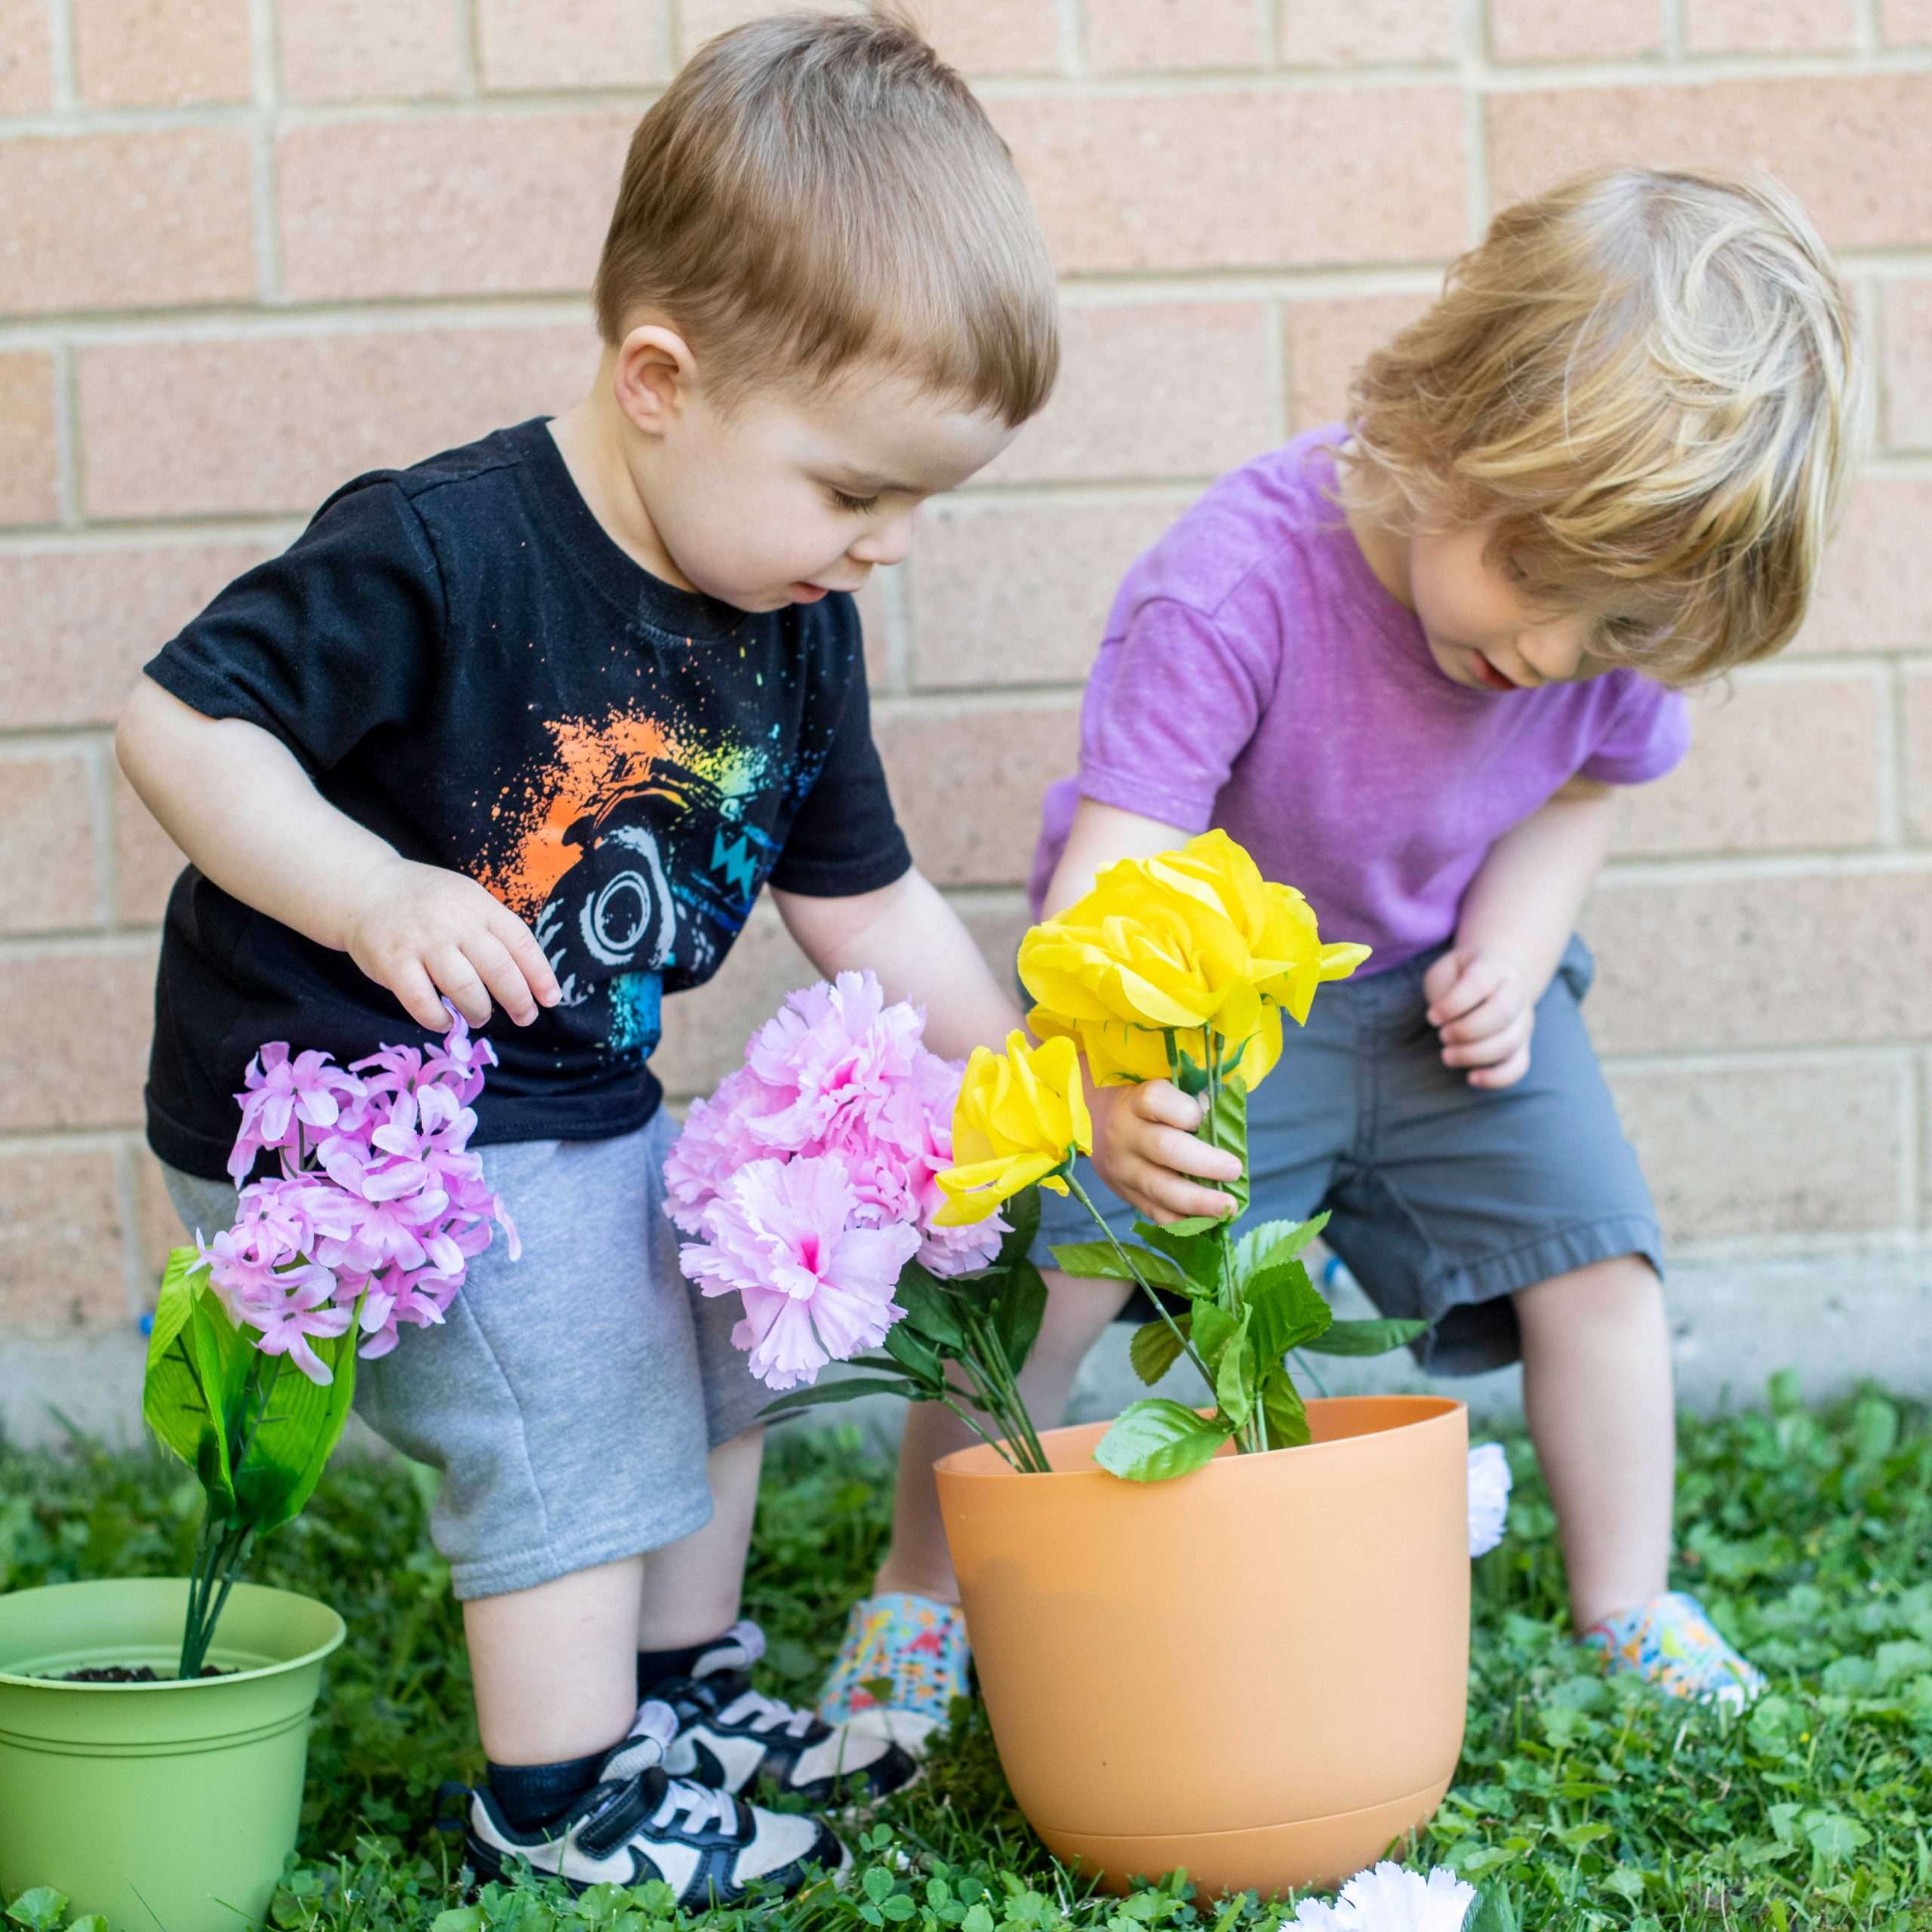 Two toddlers "planting" flowers in dirt outside of Northwest Family Center